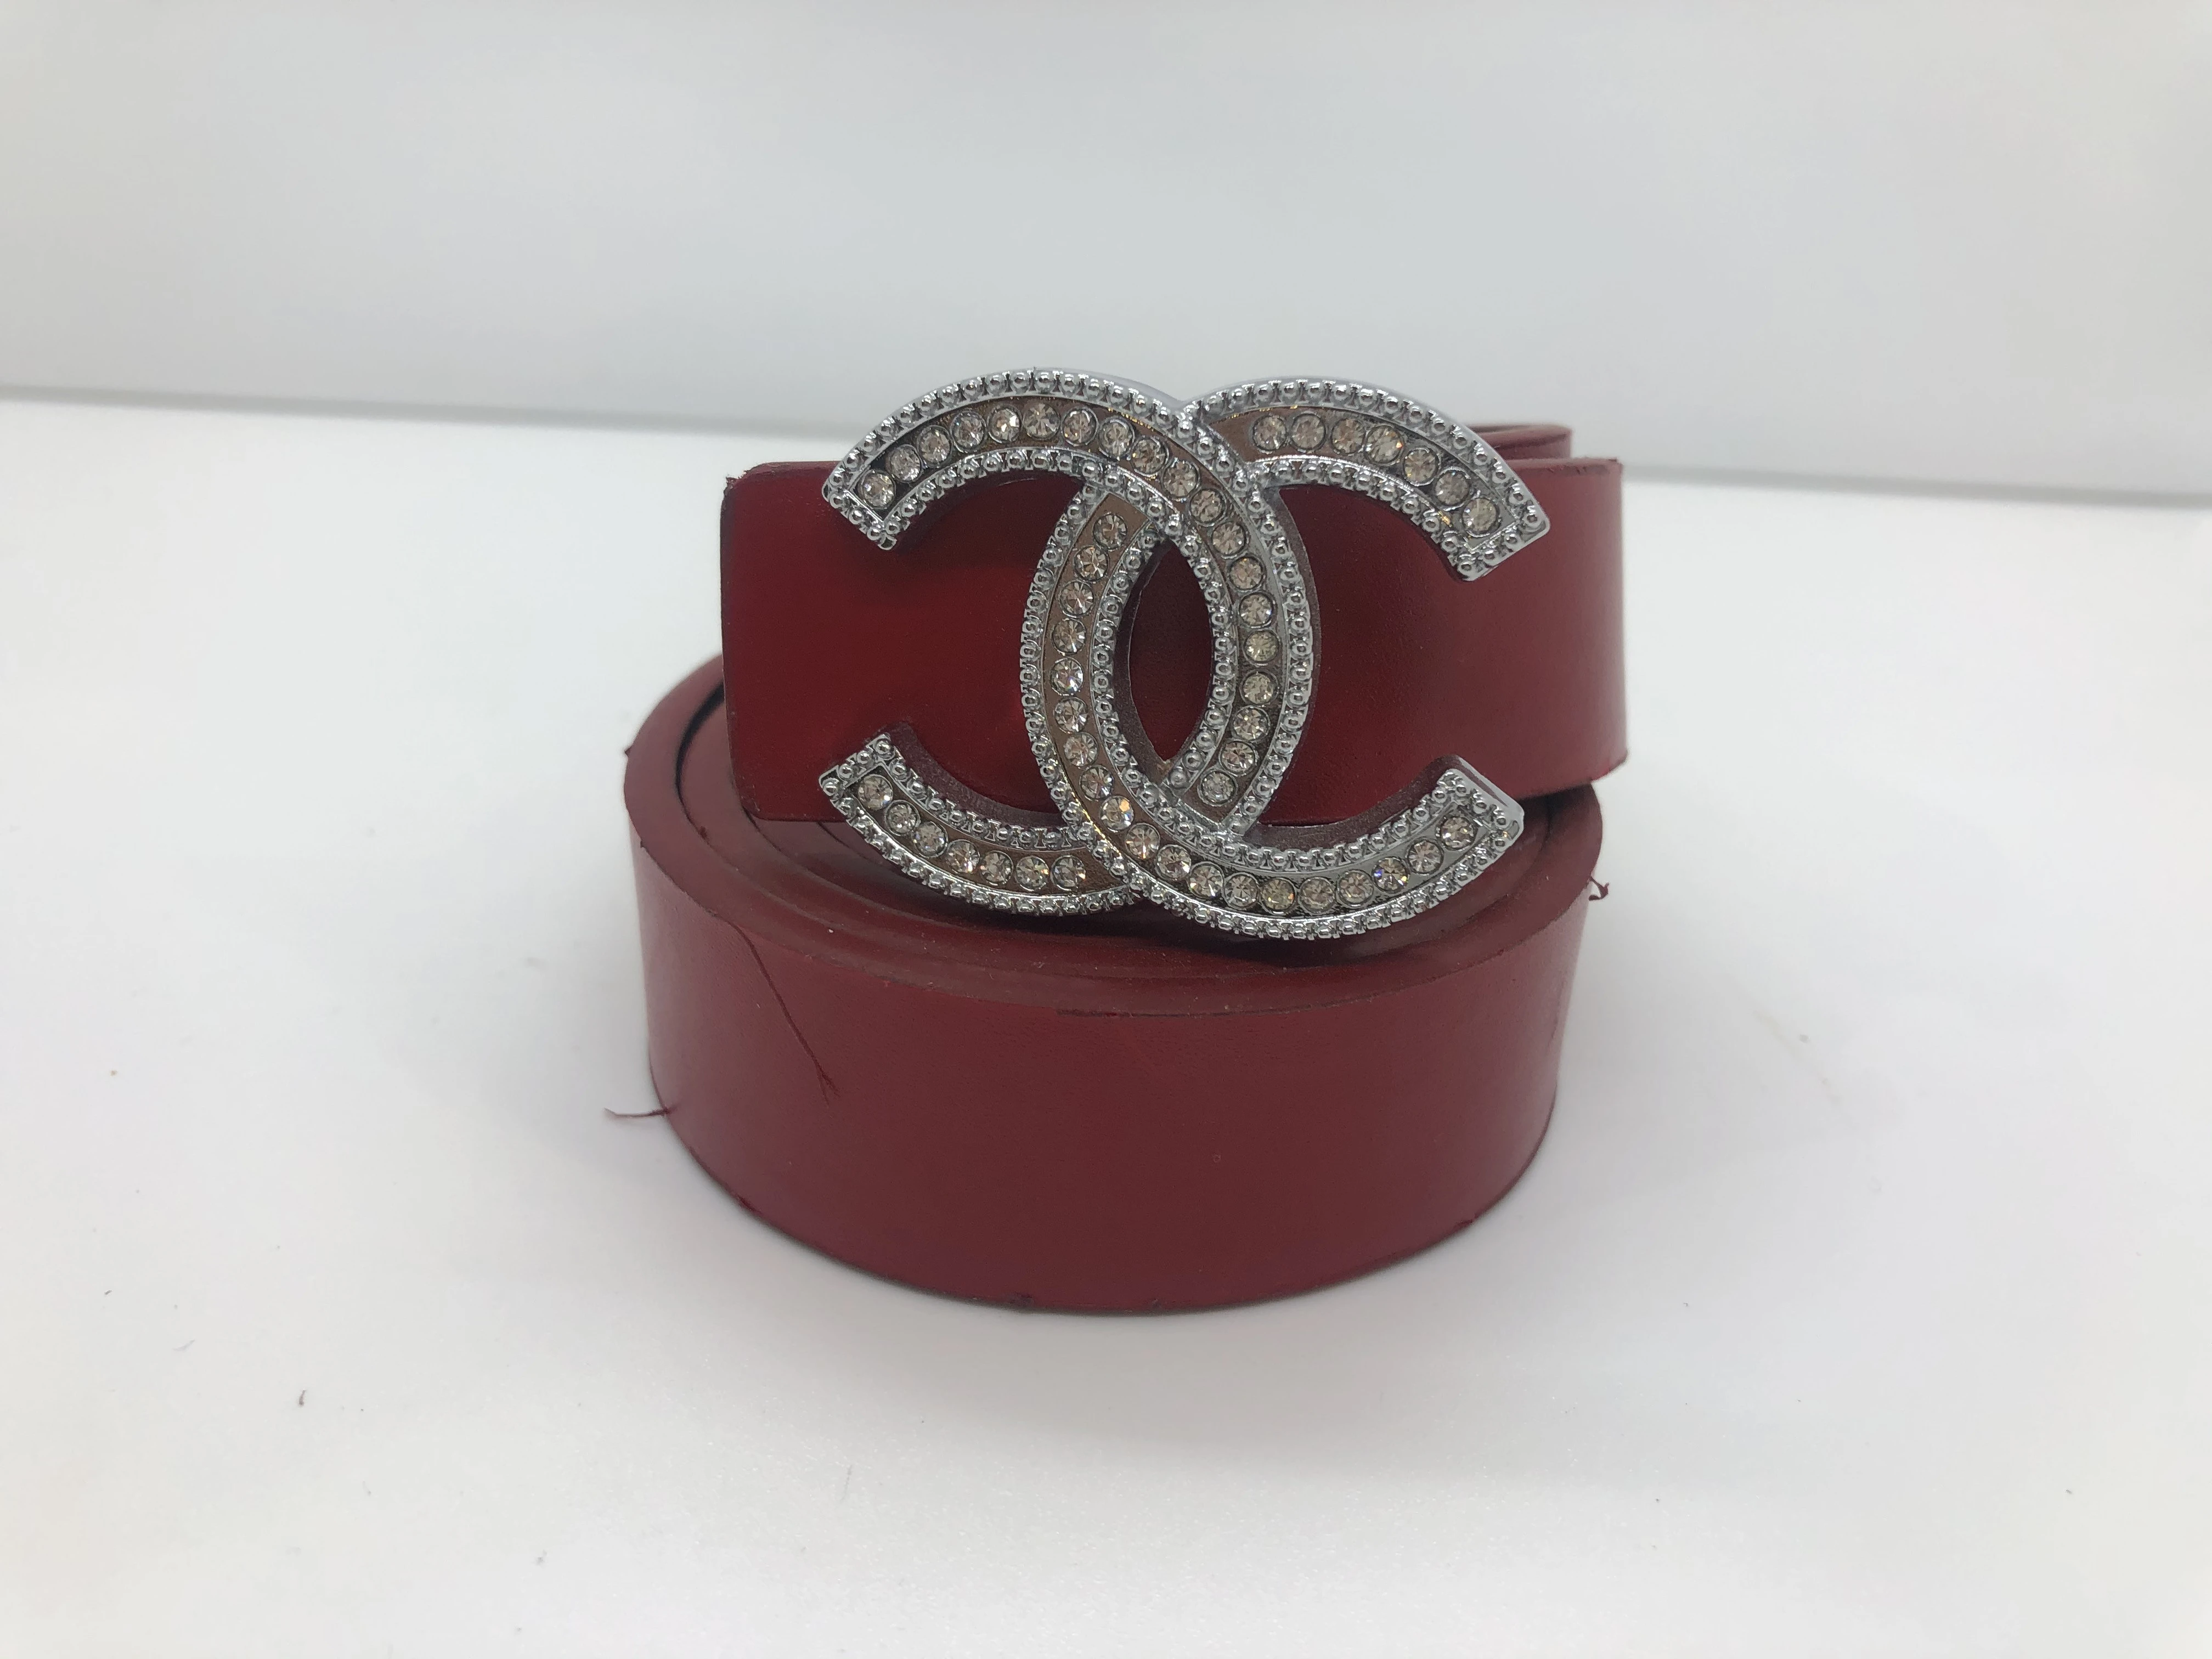 Gucci women's belt, Burgundy, with a silver buckle, and the brand's logo finishes